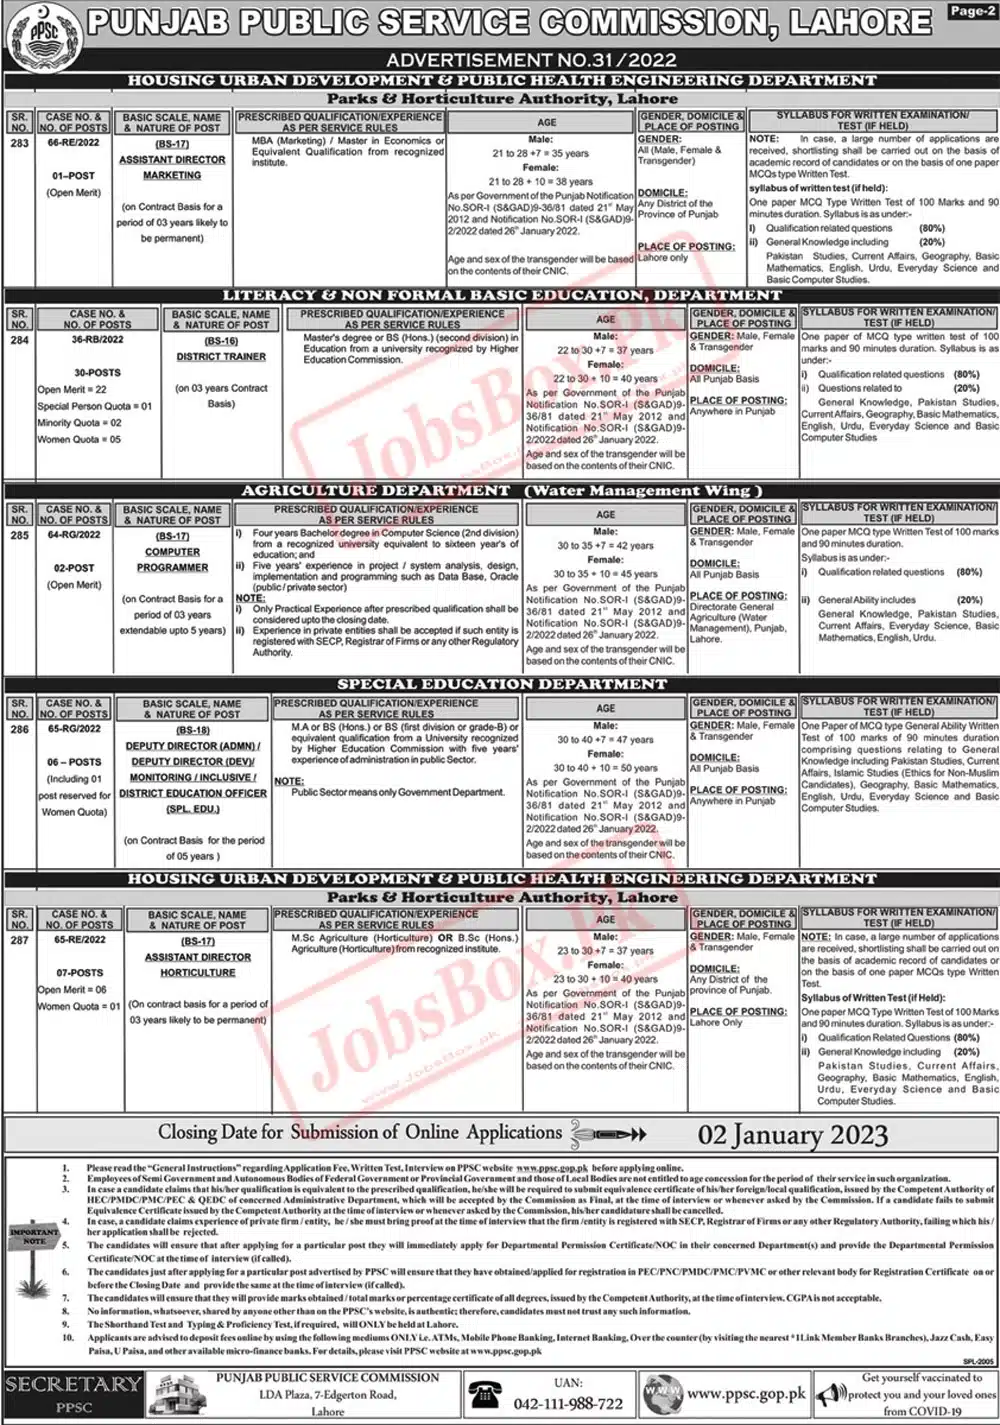 PPSC Announced New Vacancies in Education Department Punjab